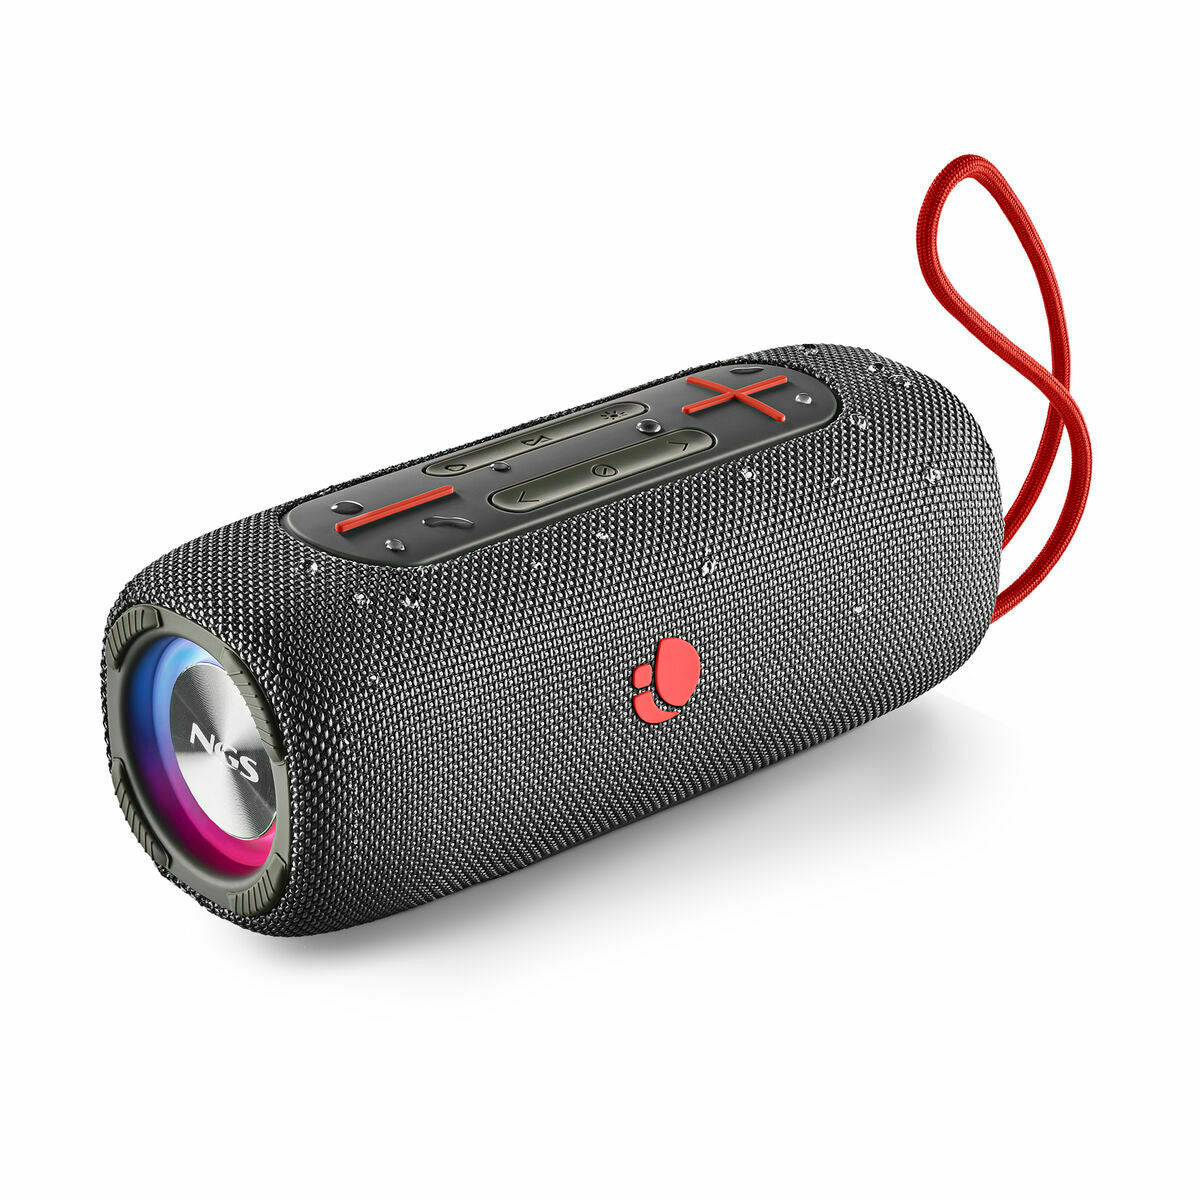 Portable Bluetooth Speakers NGS Roller Nitro 3 Black, NGS, Electronics, Mobile communication and accessories, portable-bluetooth-speakers-ngs-roller-nitro-3-black, Brand_NGS, category-reference-2609, category-reference-2882, category-reference-2923, category-reference-t-19653, category-reference-t-21311, category-reference-t-4036, category-reference-t-4037, Condition_NEW, entertainment, music, Price_50 - 100, telephones & tablets, wifi y bluetooth, RiotNook